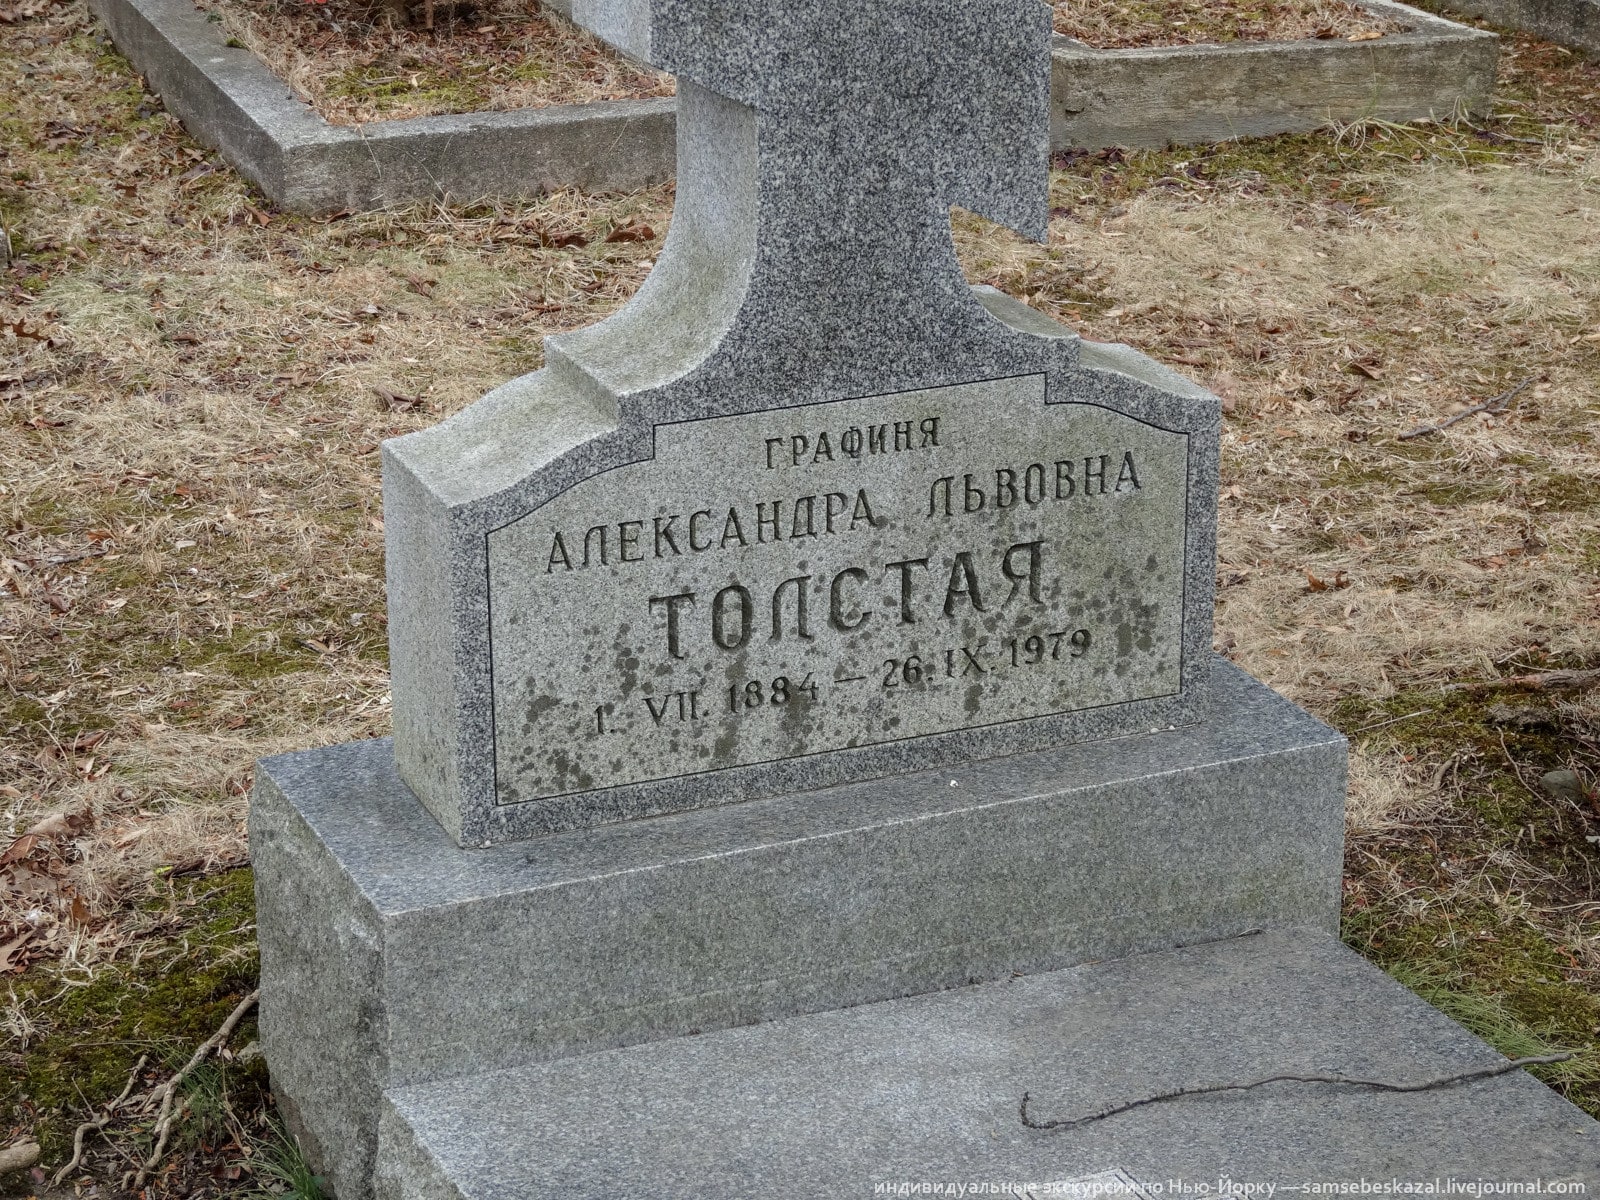 The Russian cemetery USA